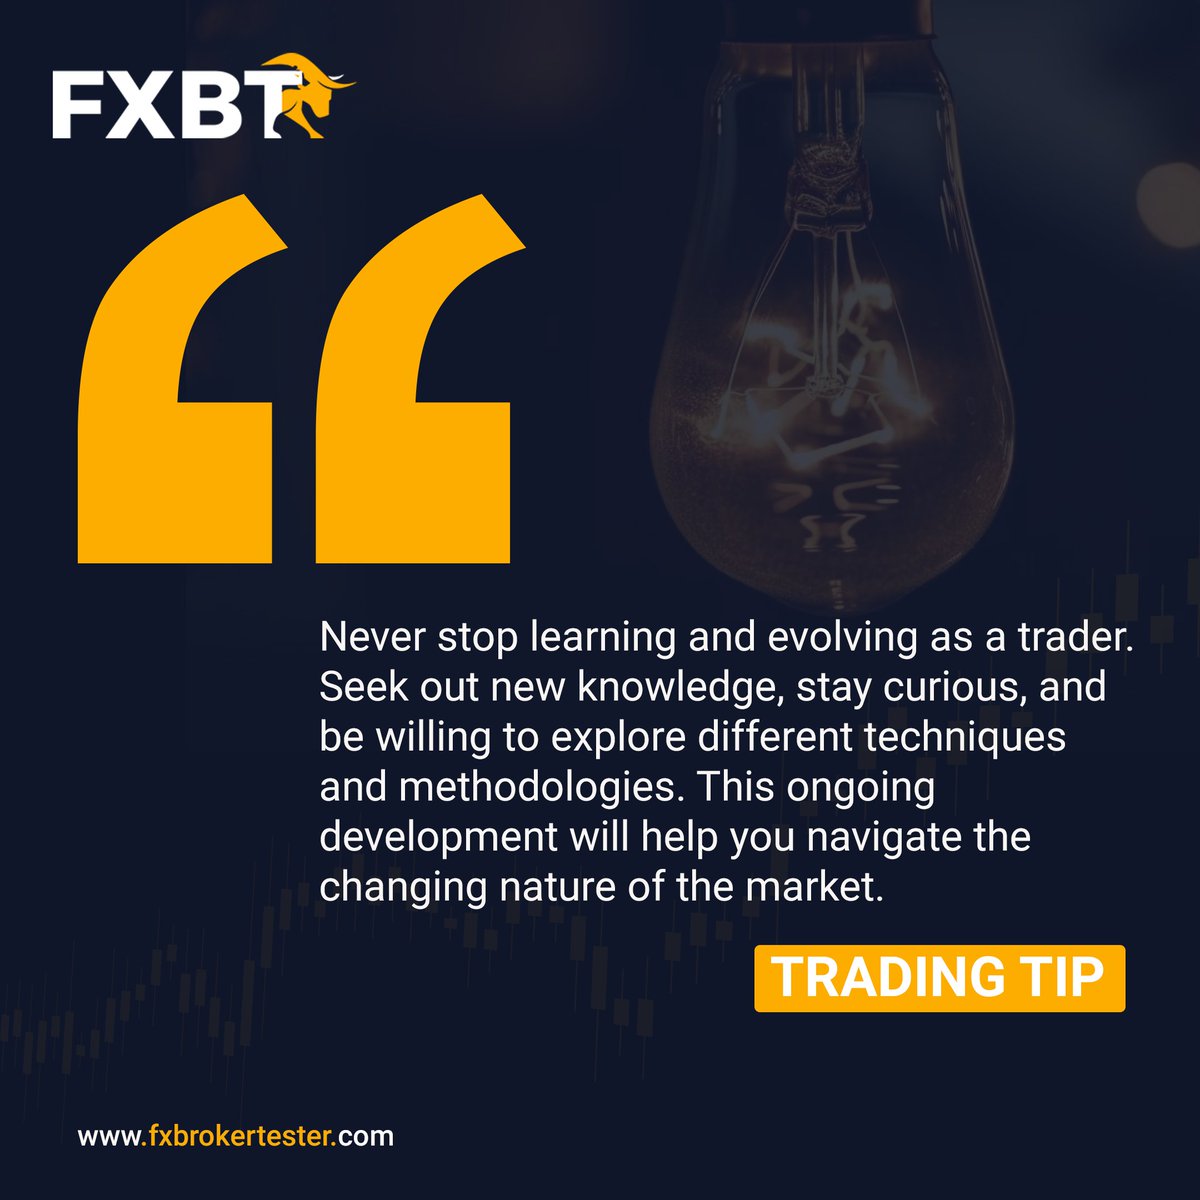 Embrace the Journey of Lifelong Learning! 📚🌟 In the ever-evolving world of trading, curiosity fuels growth. Stay hungry for knowledge, explore diverse techniques, and adapt to new methodologies.

#LifelongLearning #TradingJourney #StayCurious